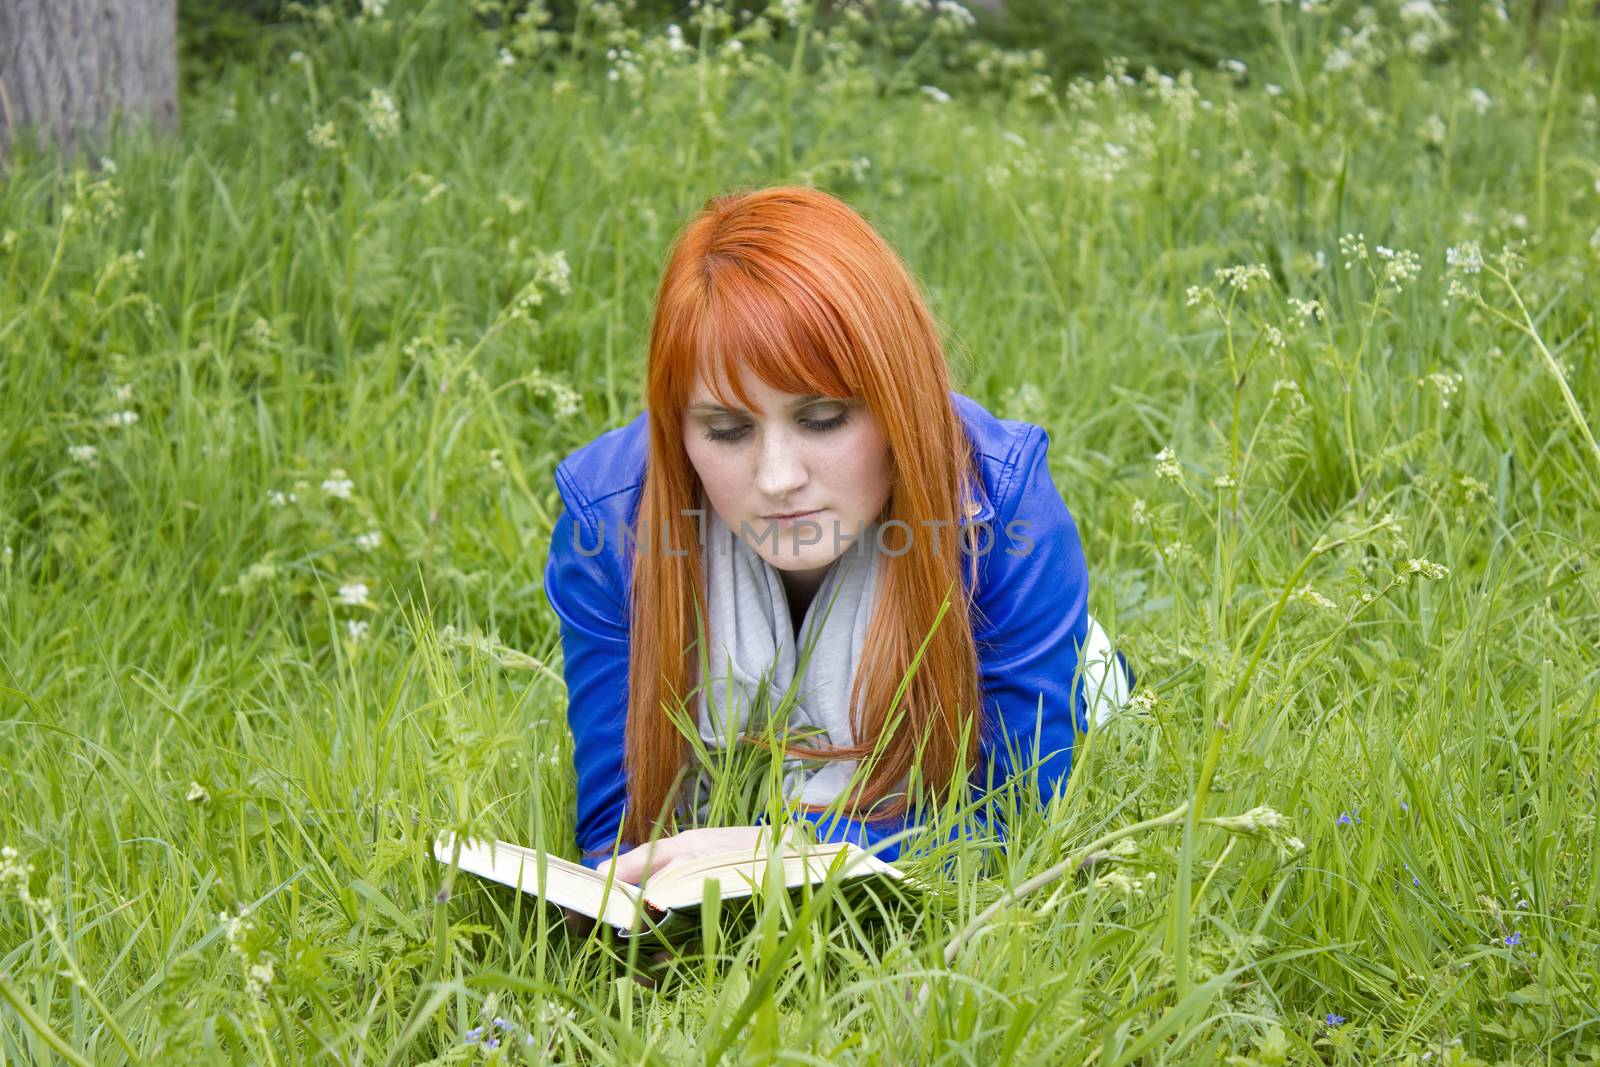 Young woman with red hair reading a book  by miradrozdowski